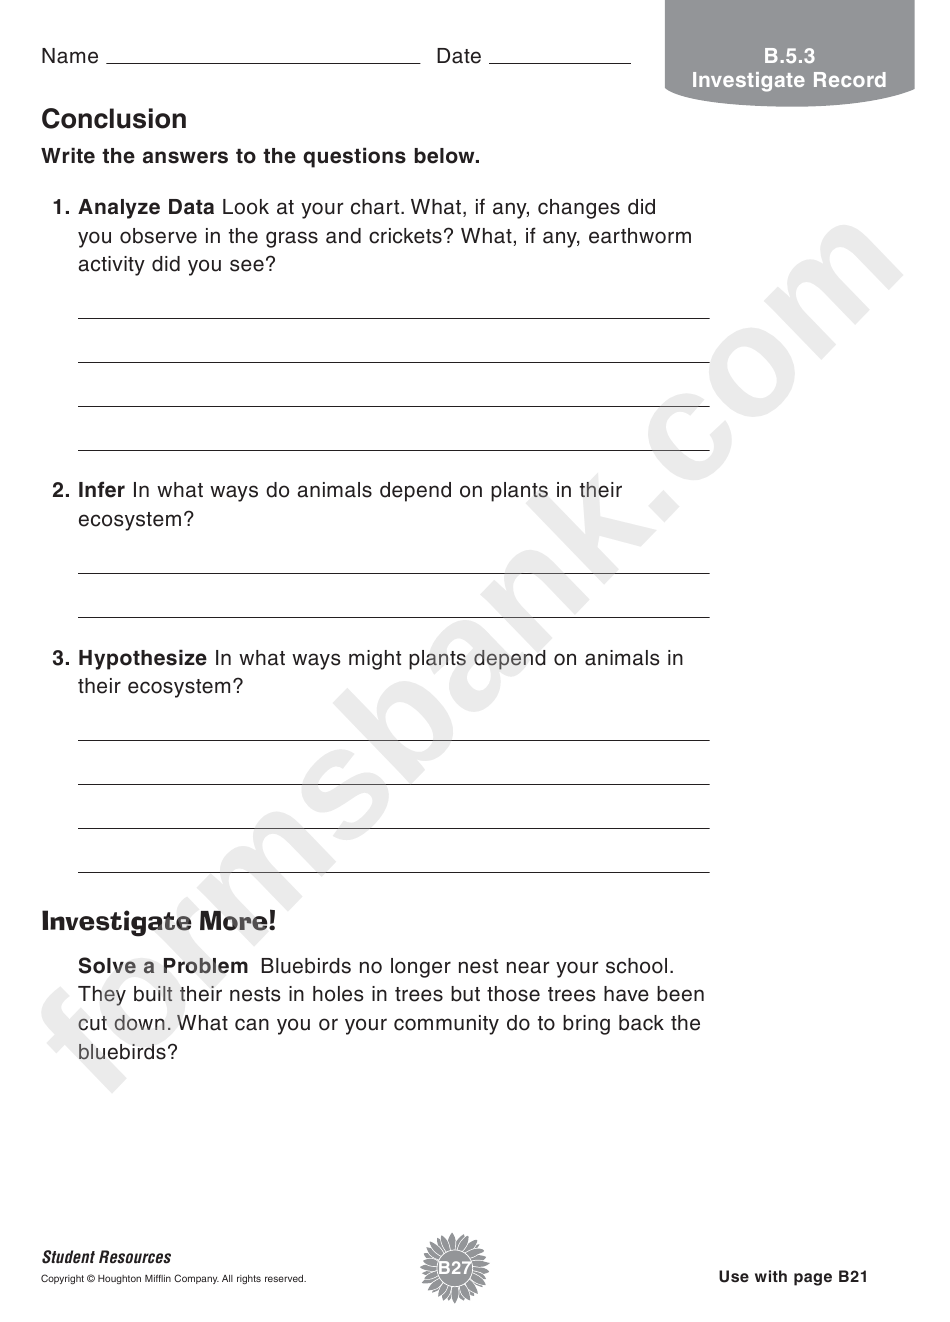 Organisms Interact Investigate Record Science Worksheet